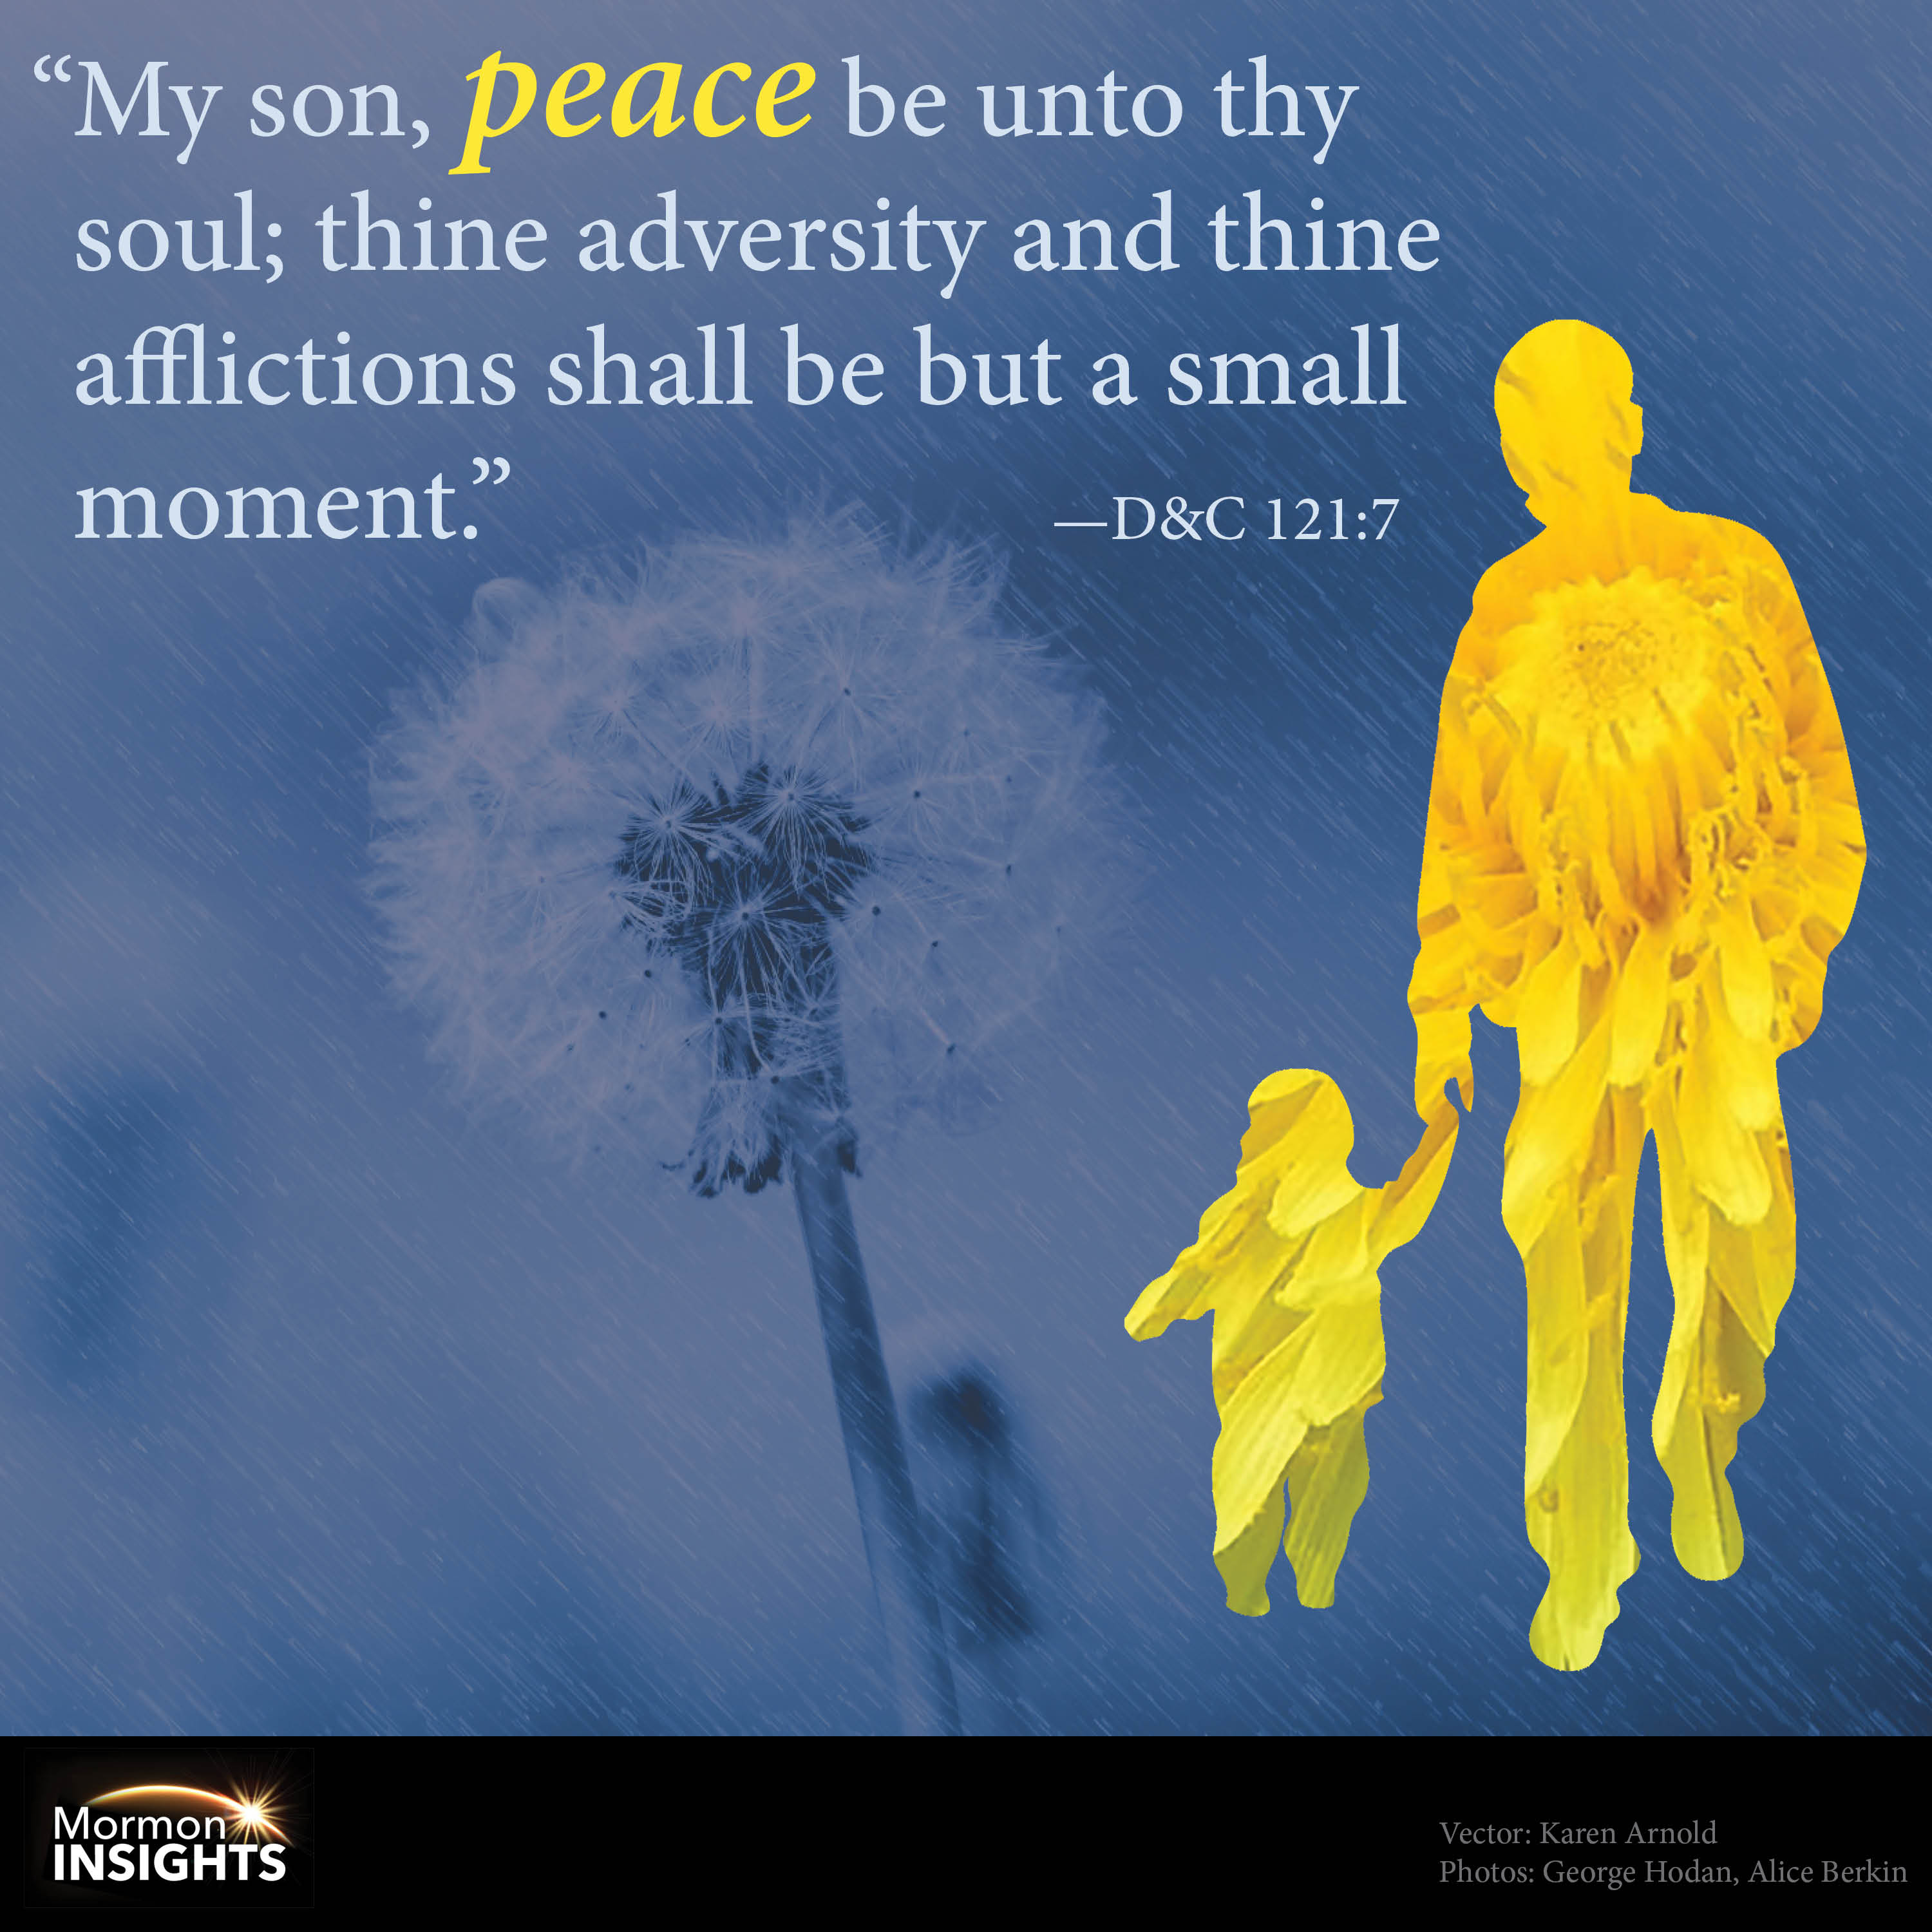 "My son, peace be unto thy soul; thine adversity and thine afflictions shall be but a small moment." D&C 121:7